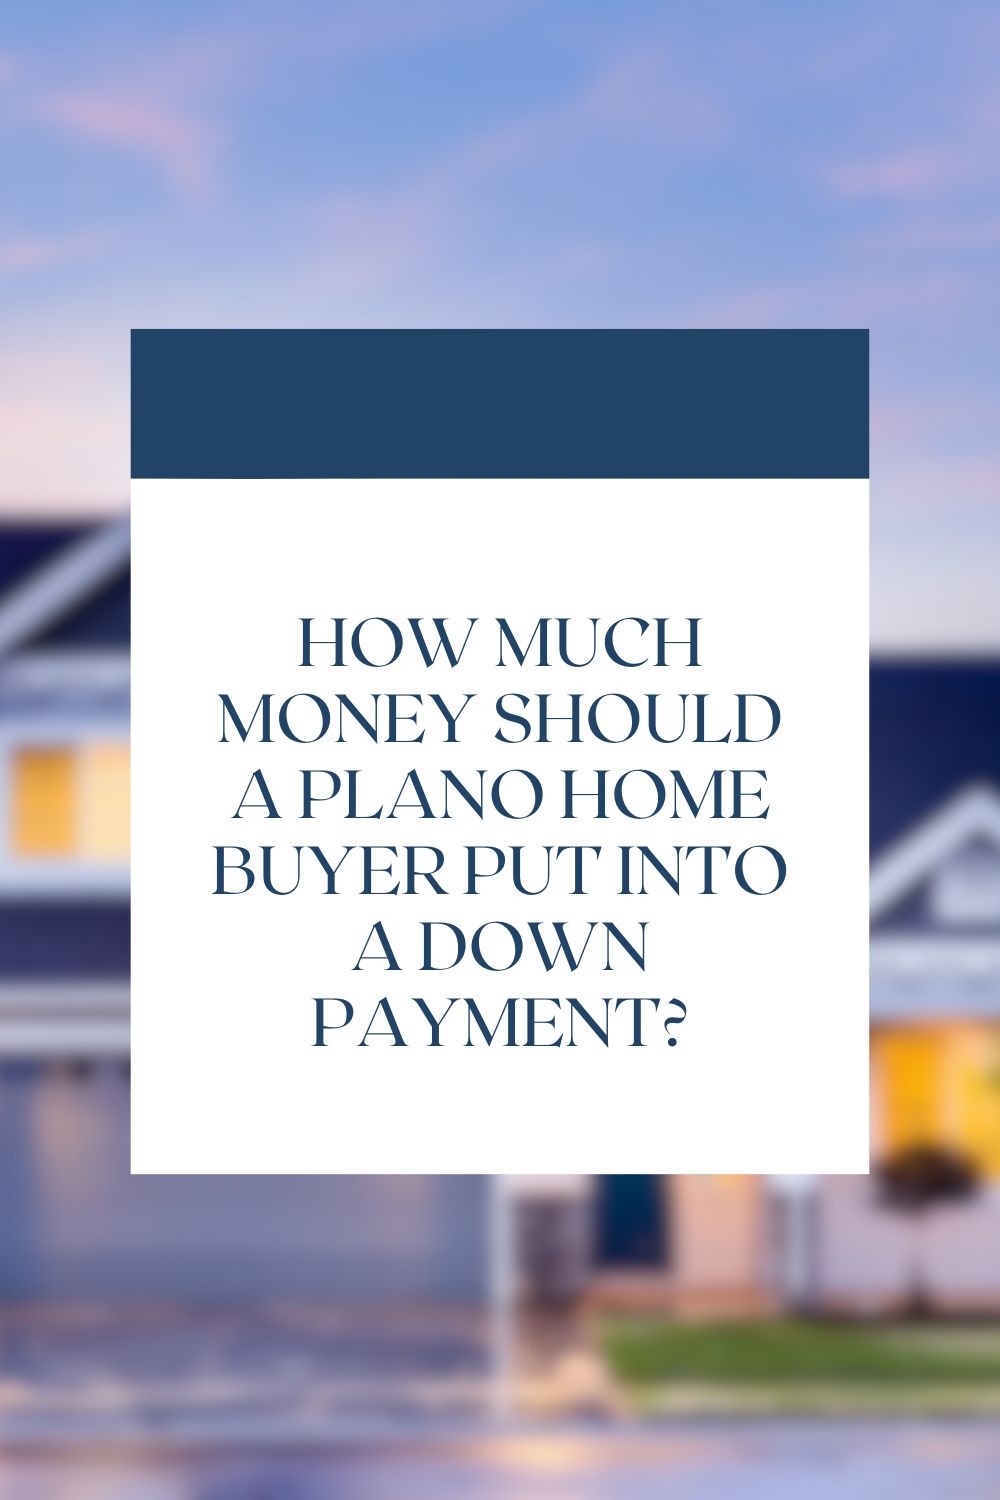 How Much Money Should A Plano Home Buyer Put Into a Down Payment?